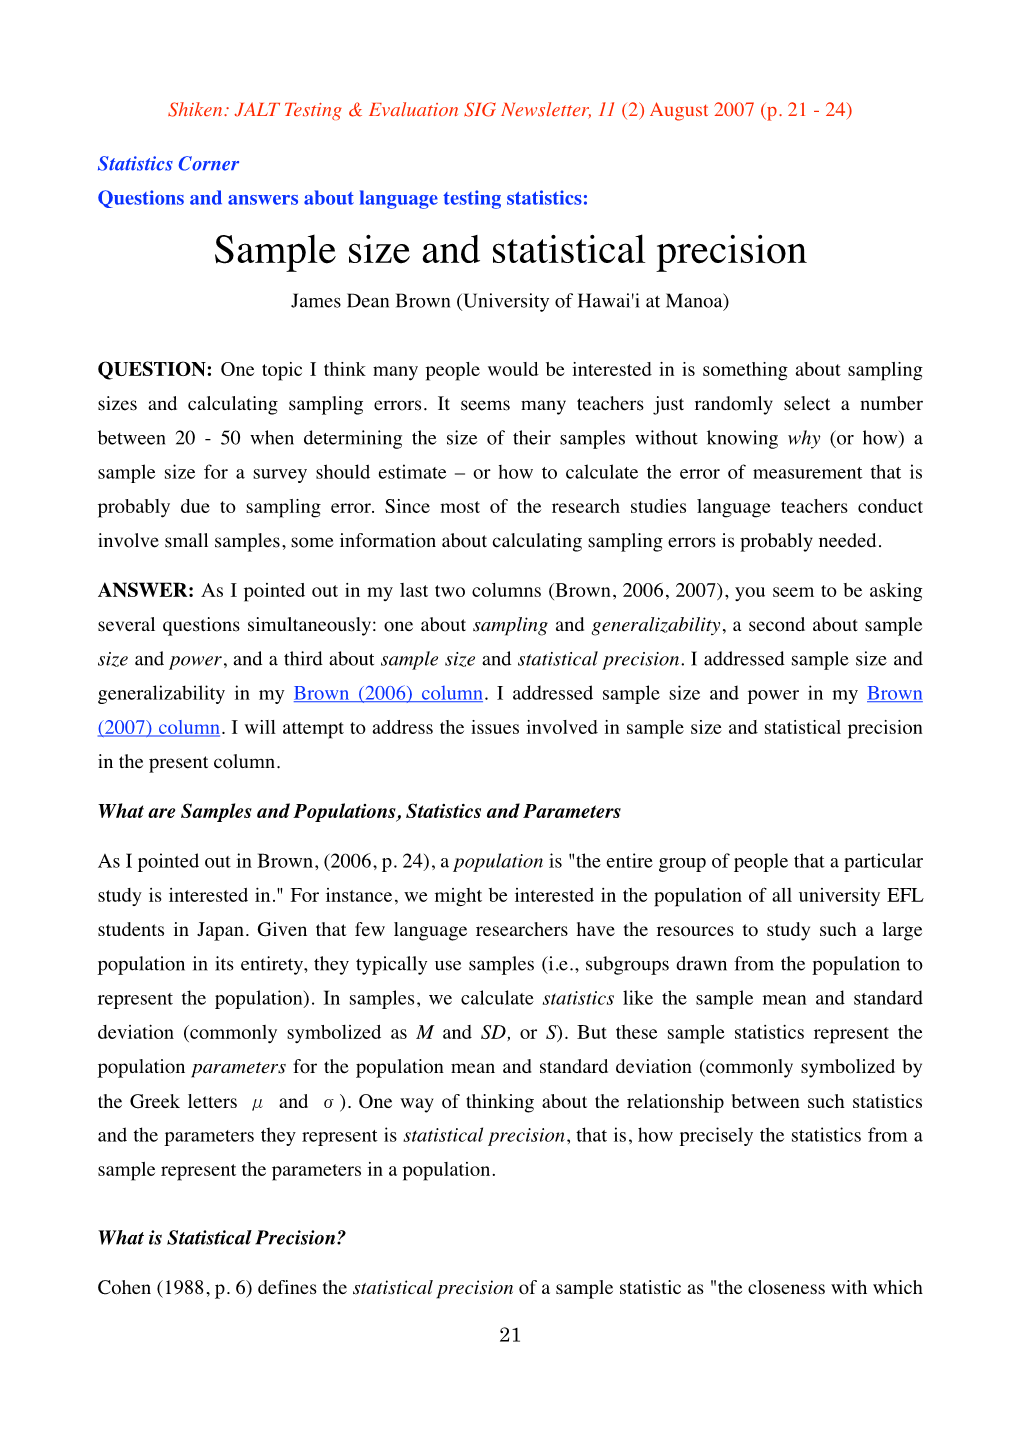 Sample Size and Statistical Precision James Dean Brown (University of Hawai'i at Manoa)